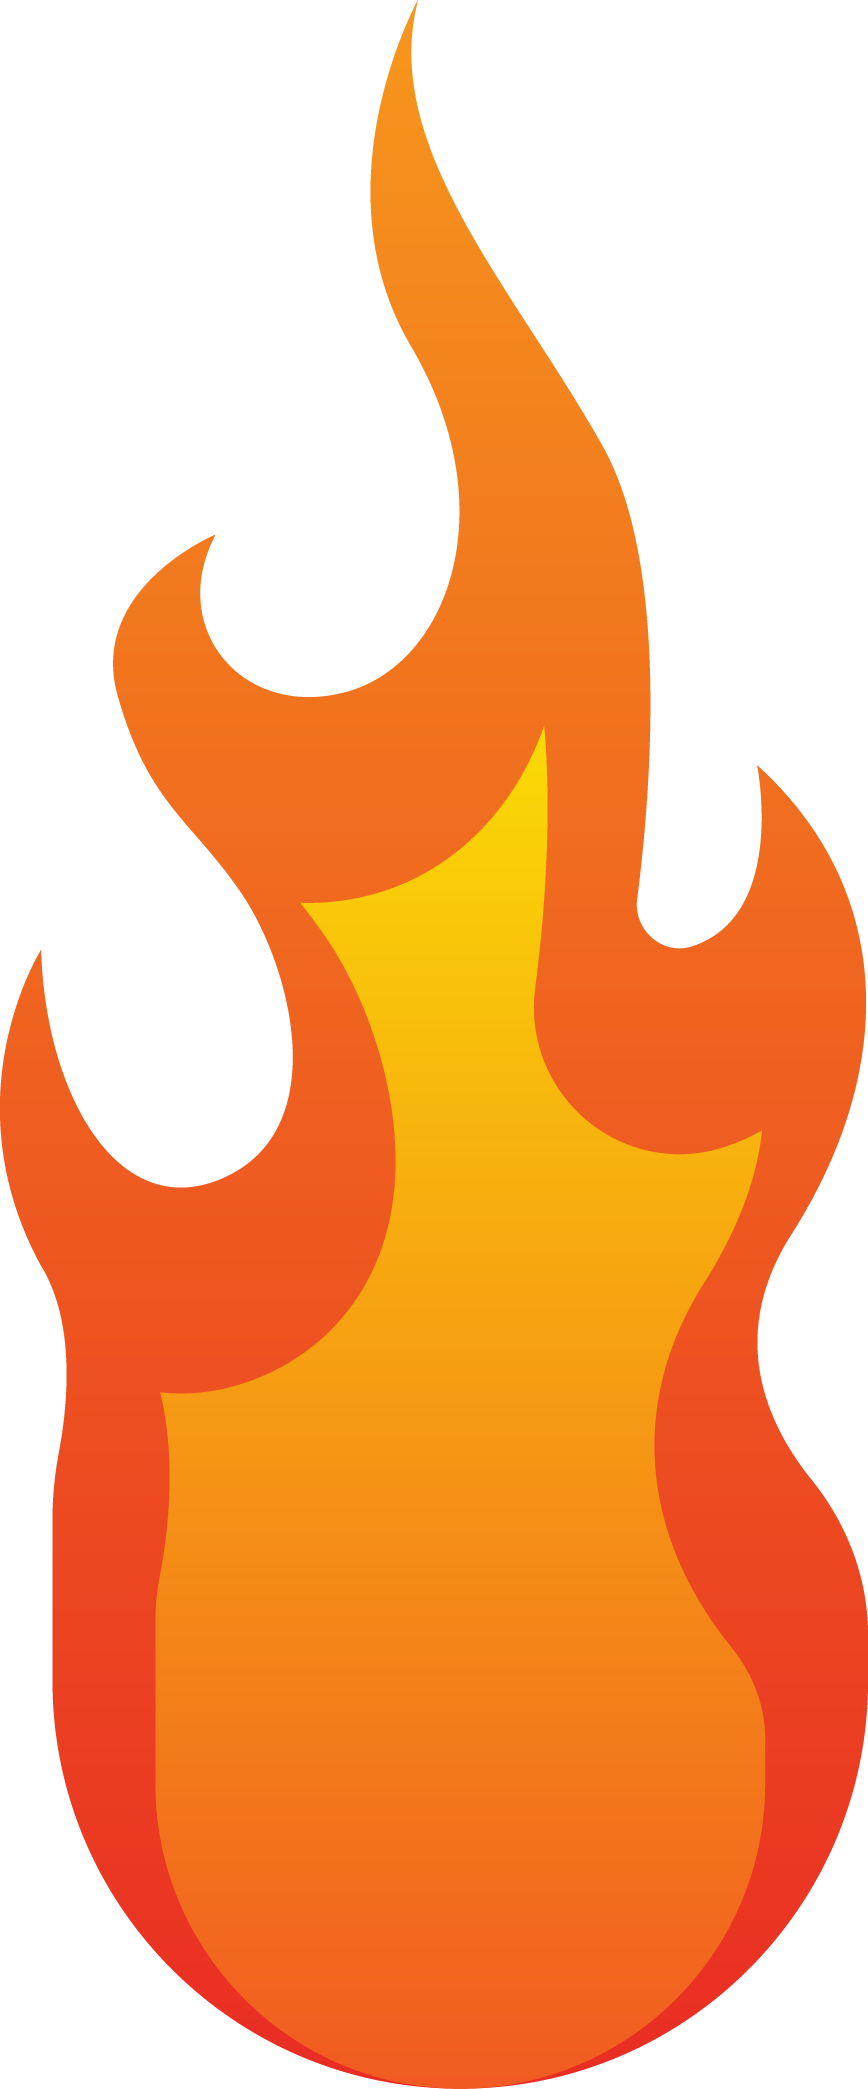 Fire Flame Combustion - Cartoon fire png download - 868*2089 - Free